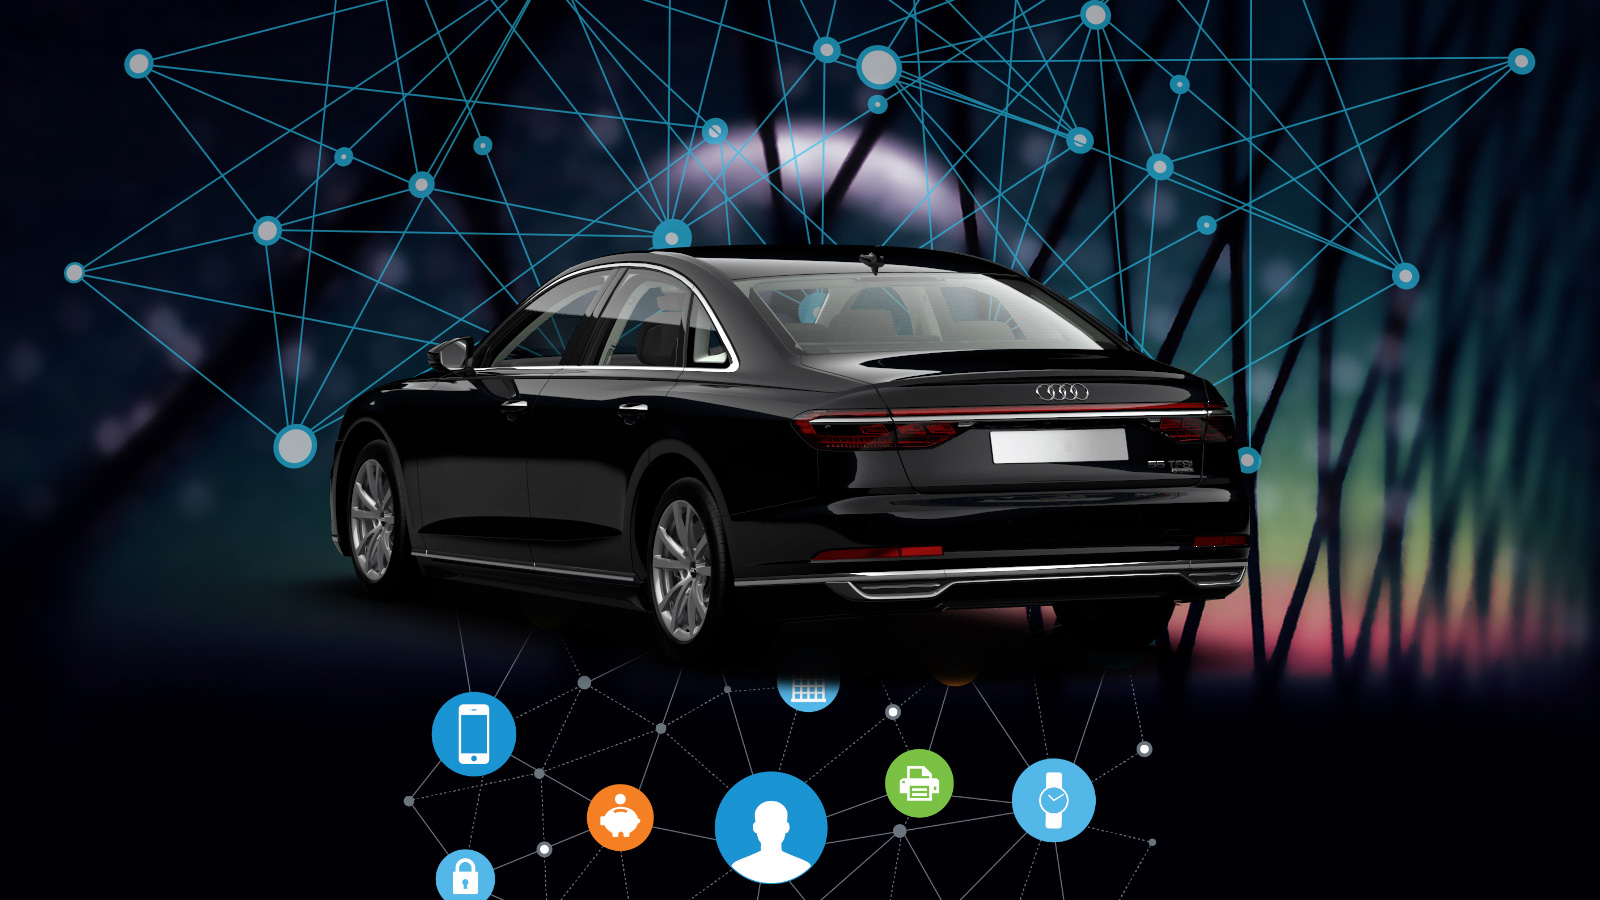 How to select an automotive IoT security solution